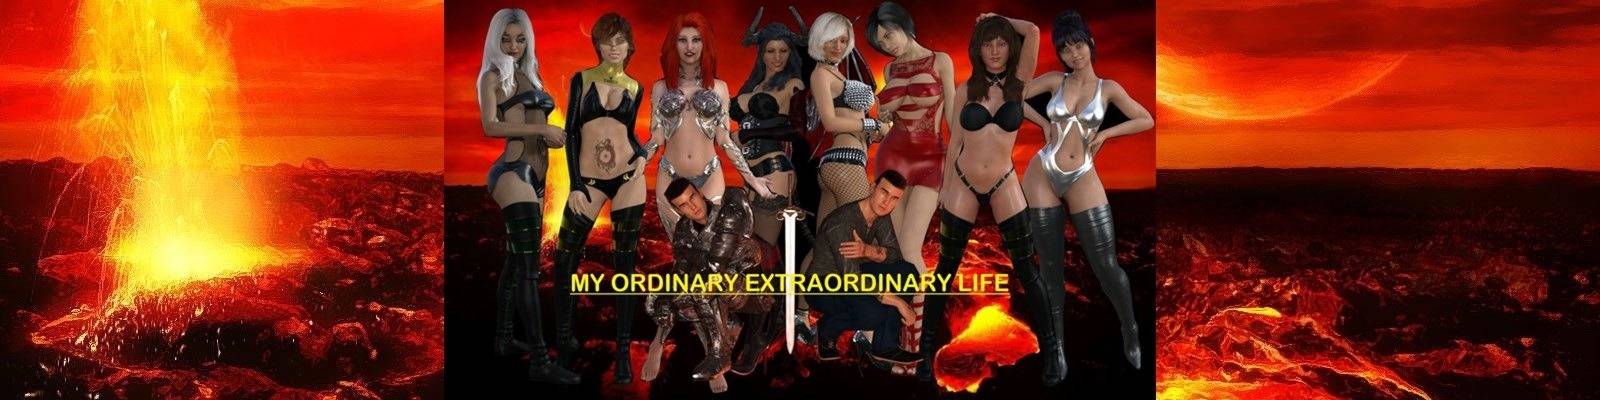 My Ordinary Extraordinary Life Ch 8 Download + Incest Patch